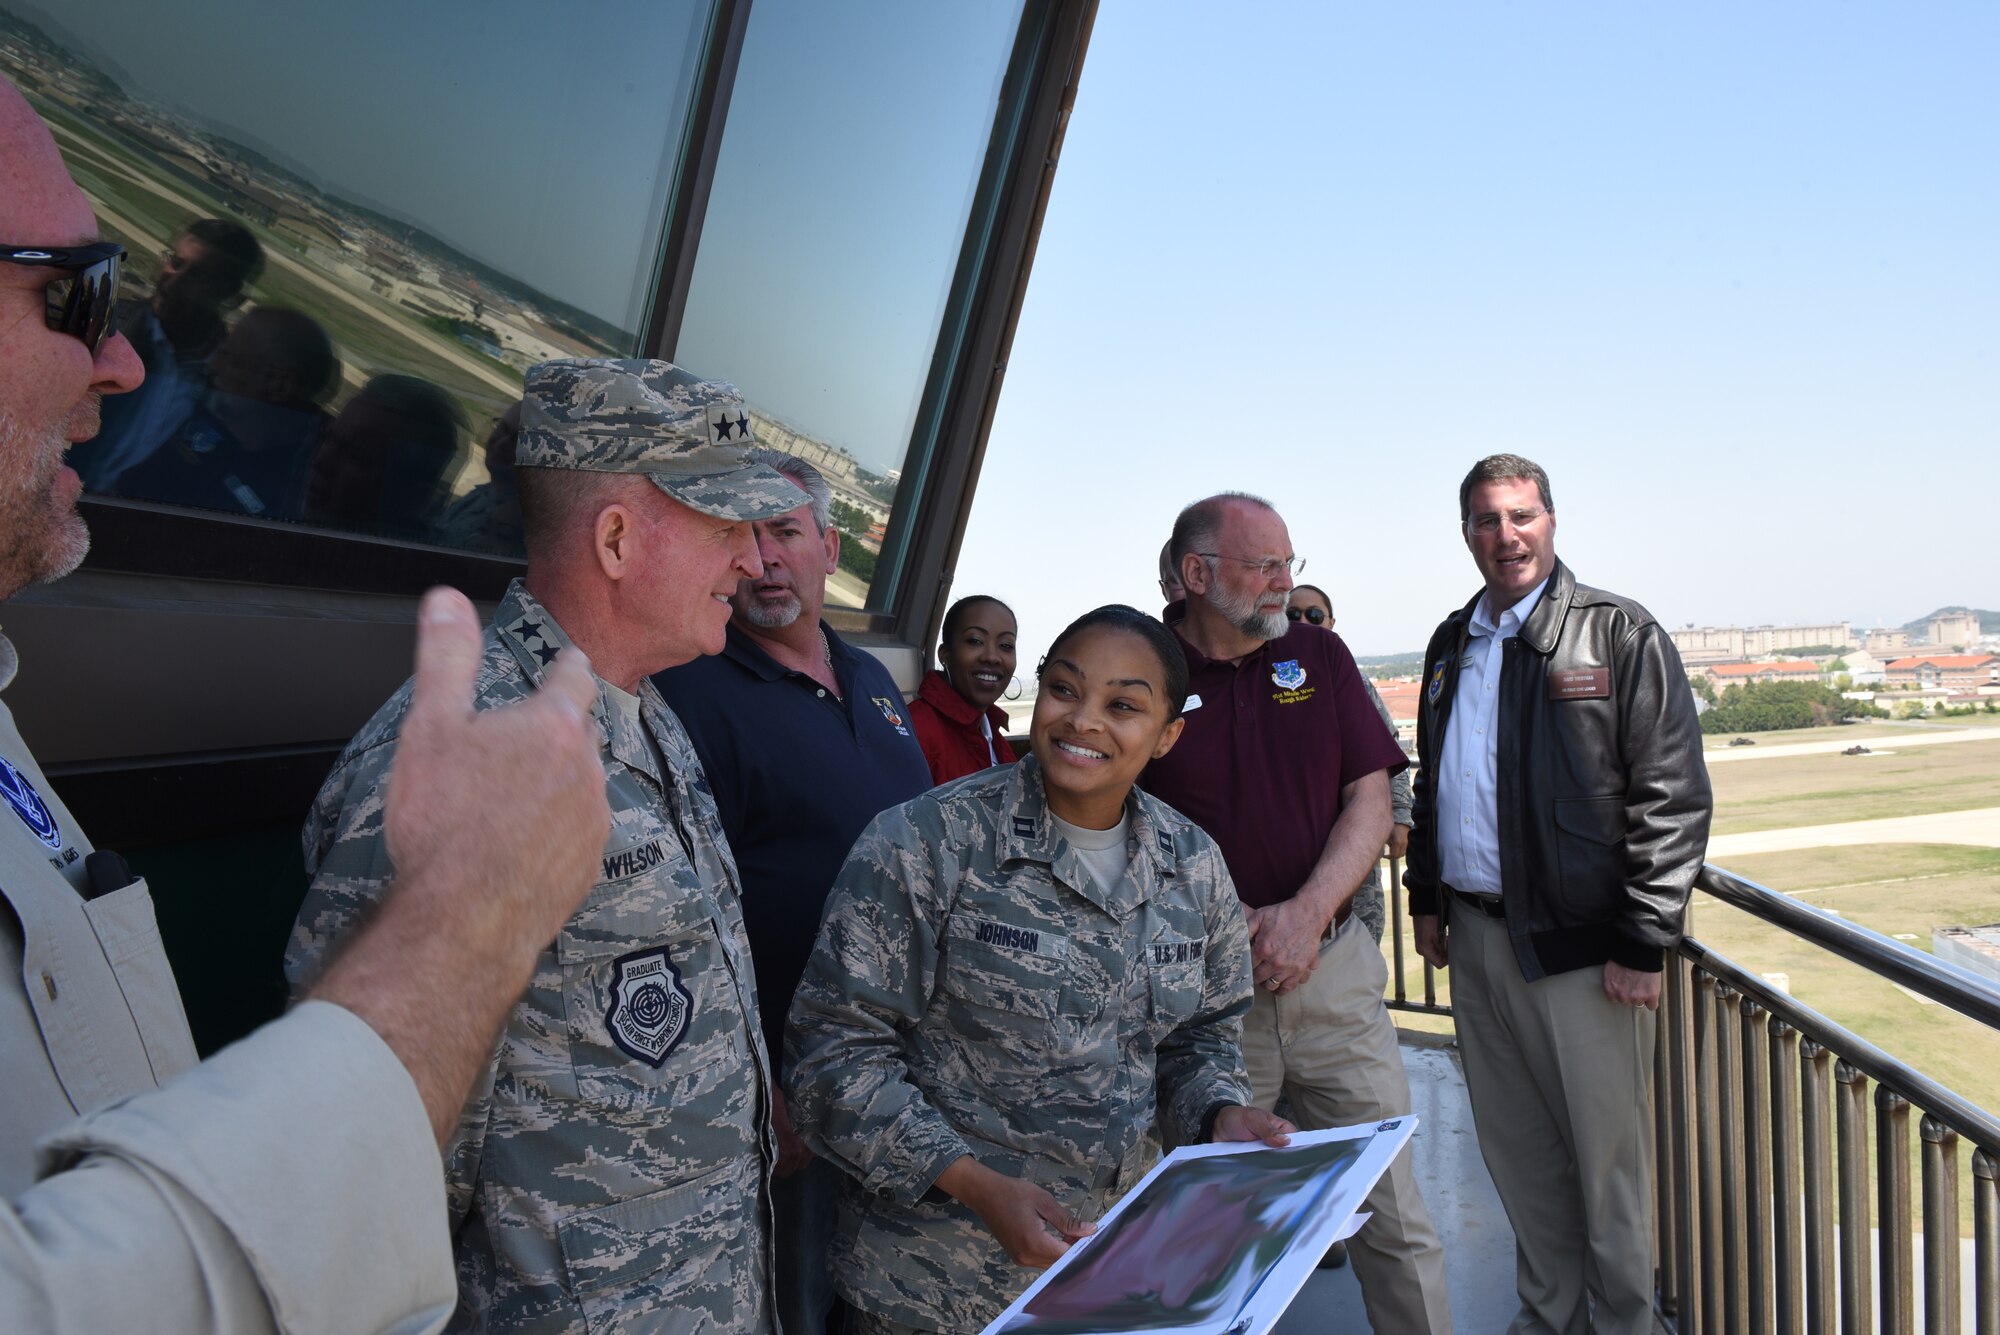 Air Force Civic Leaders meet with Airmen from the Wolf Pack to discuss their mission and help advocate for positive impacts to issues across the Air Force.